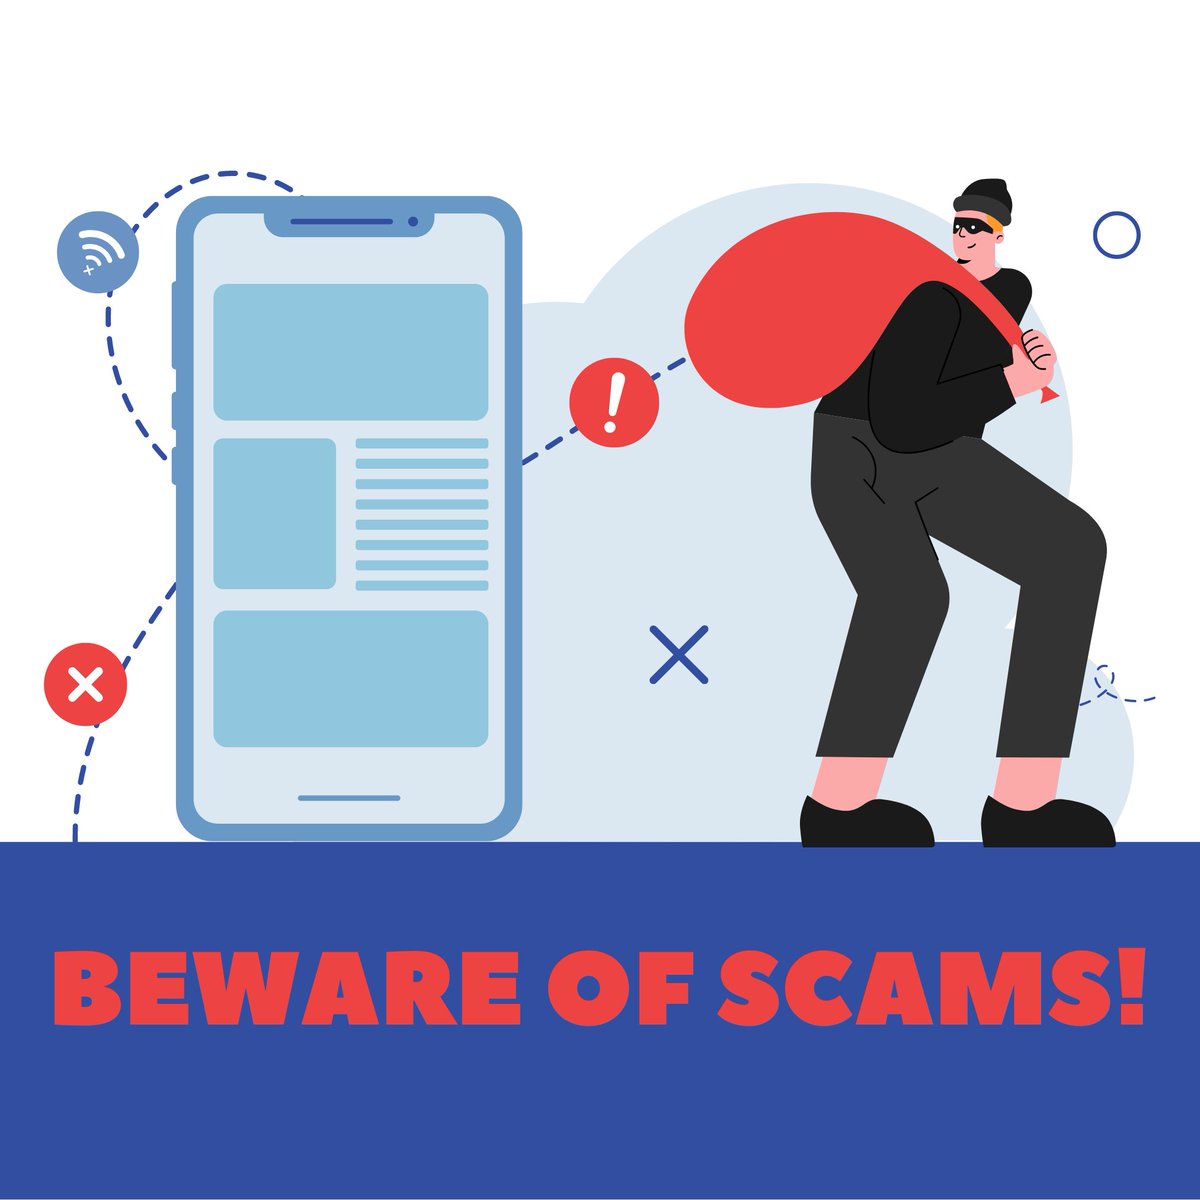 Scammers Want Your Home!😳 - mailchi.mp/915623663b2a/s…
#scammer #scammers #bewareofscammers #homeowners #foreclosures #refinanceyourhome #leaseback #baitandswitch #scamalert #shahairrealtor #shasellsrealestate #dfwrealestate #dfwrealtor #newsletter #realestatespecialist